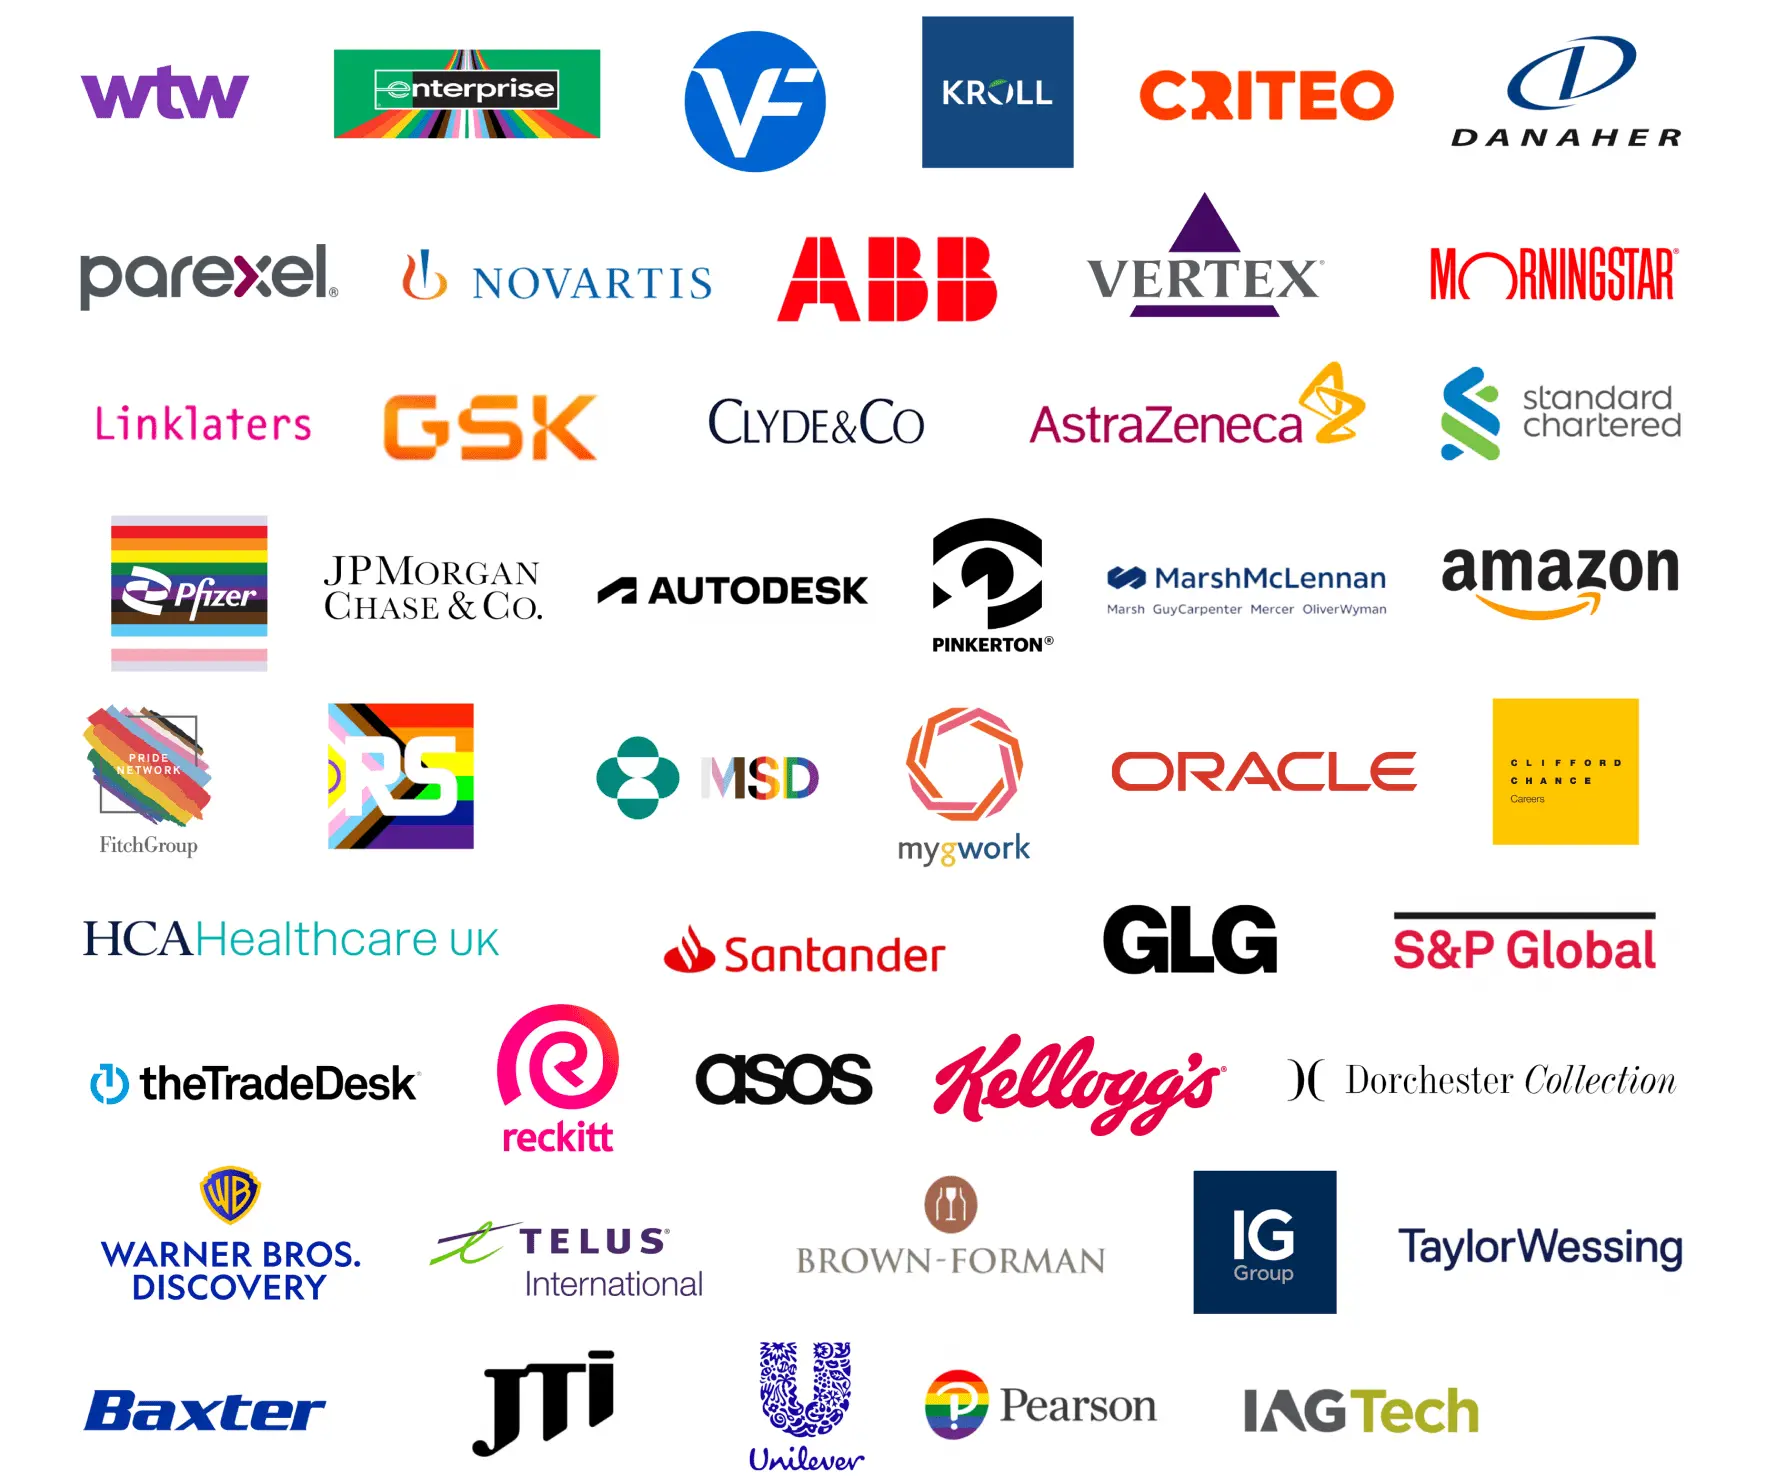 Our Inclusive Partners